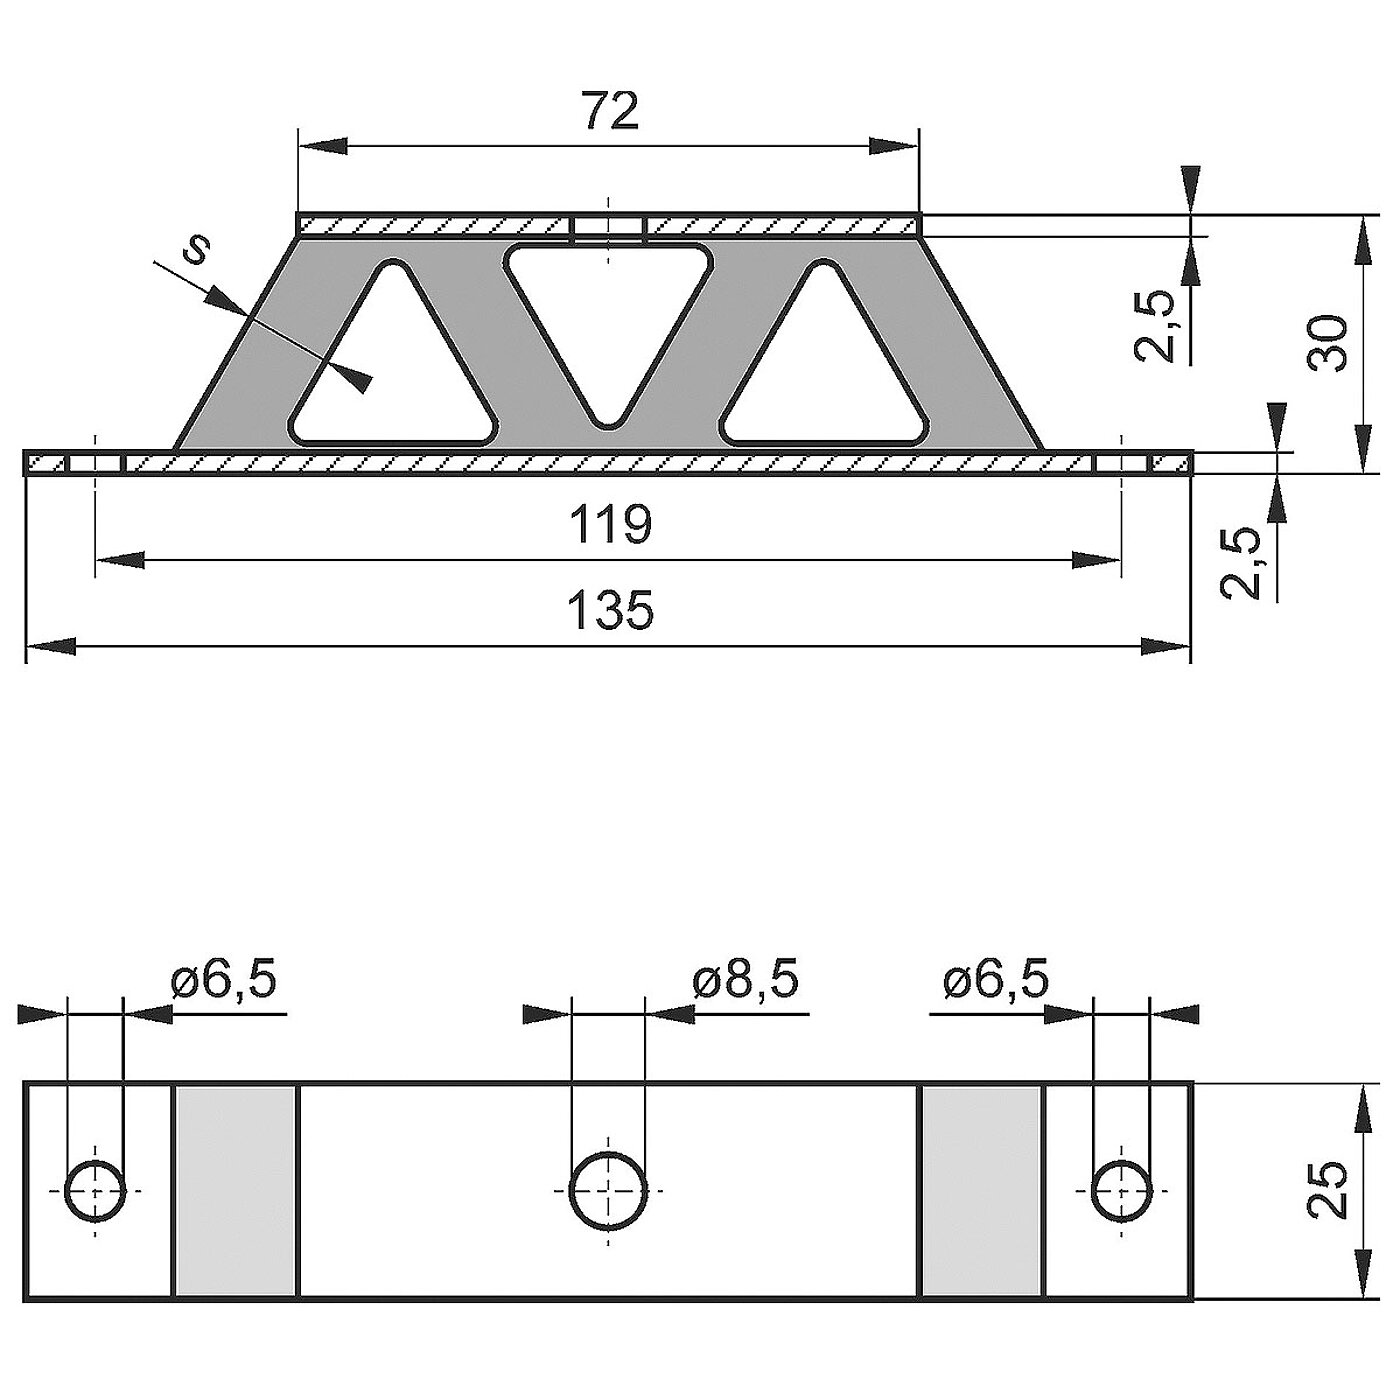 schematic drawing of a rubber-metal bar-style bearing with bottom plate, carrier plate and a vulcanized elastomer corpus in between